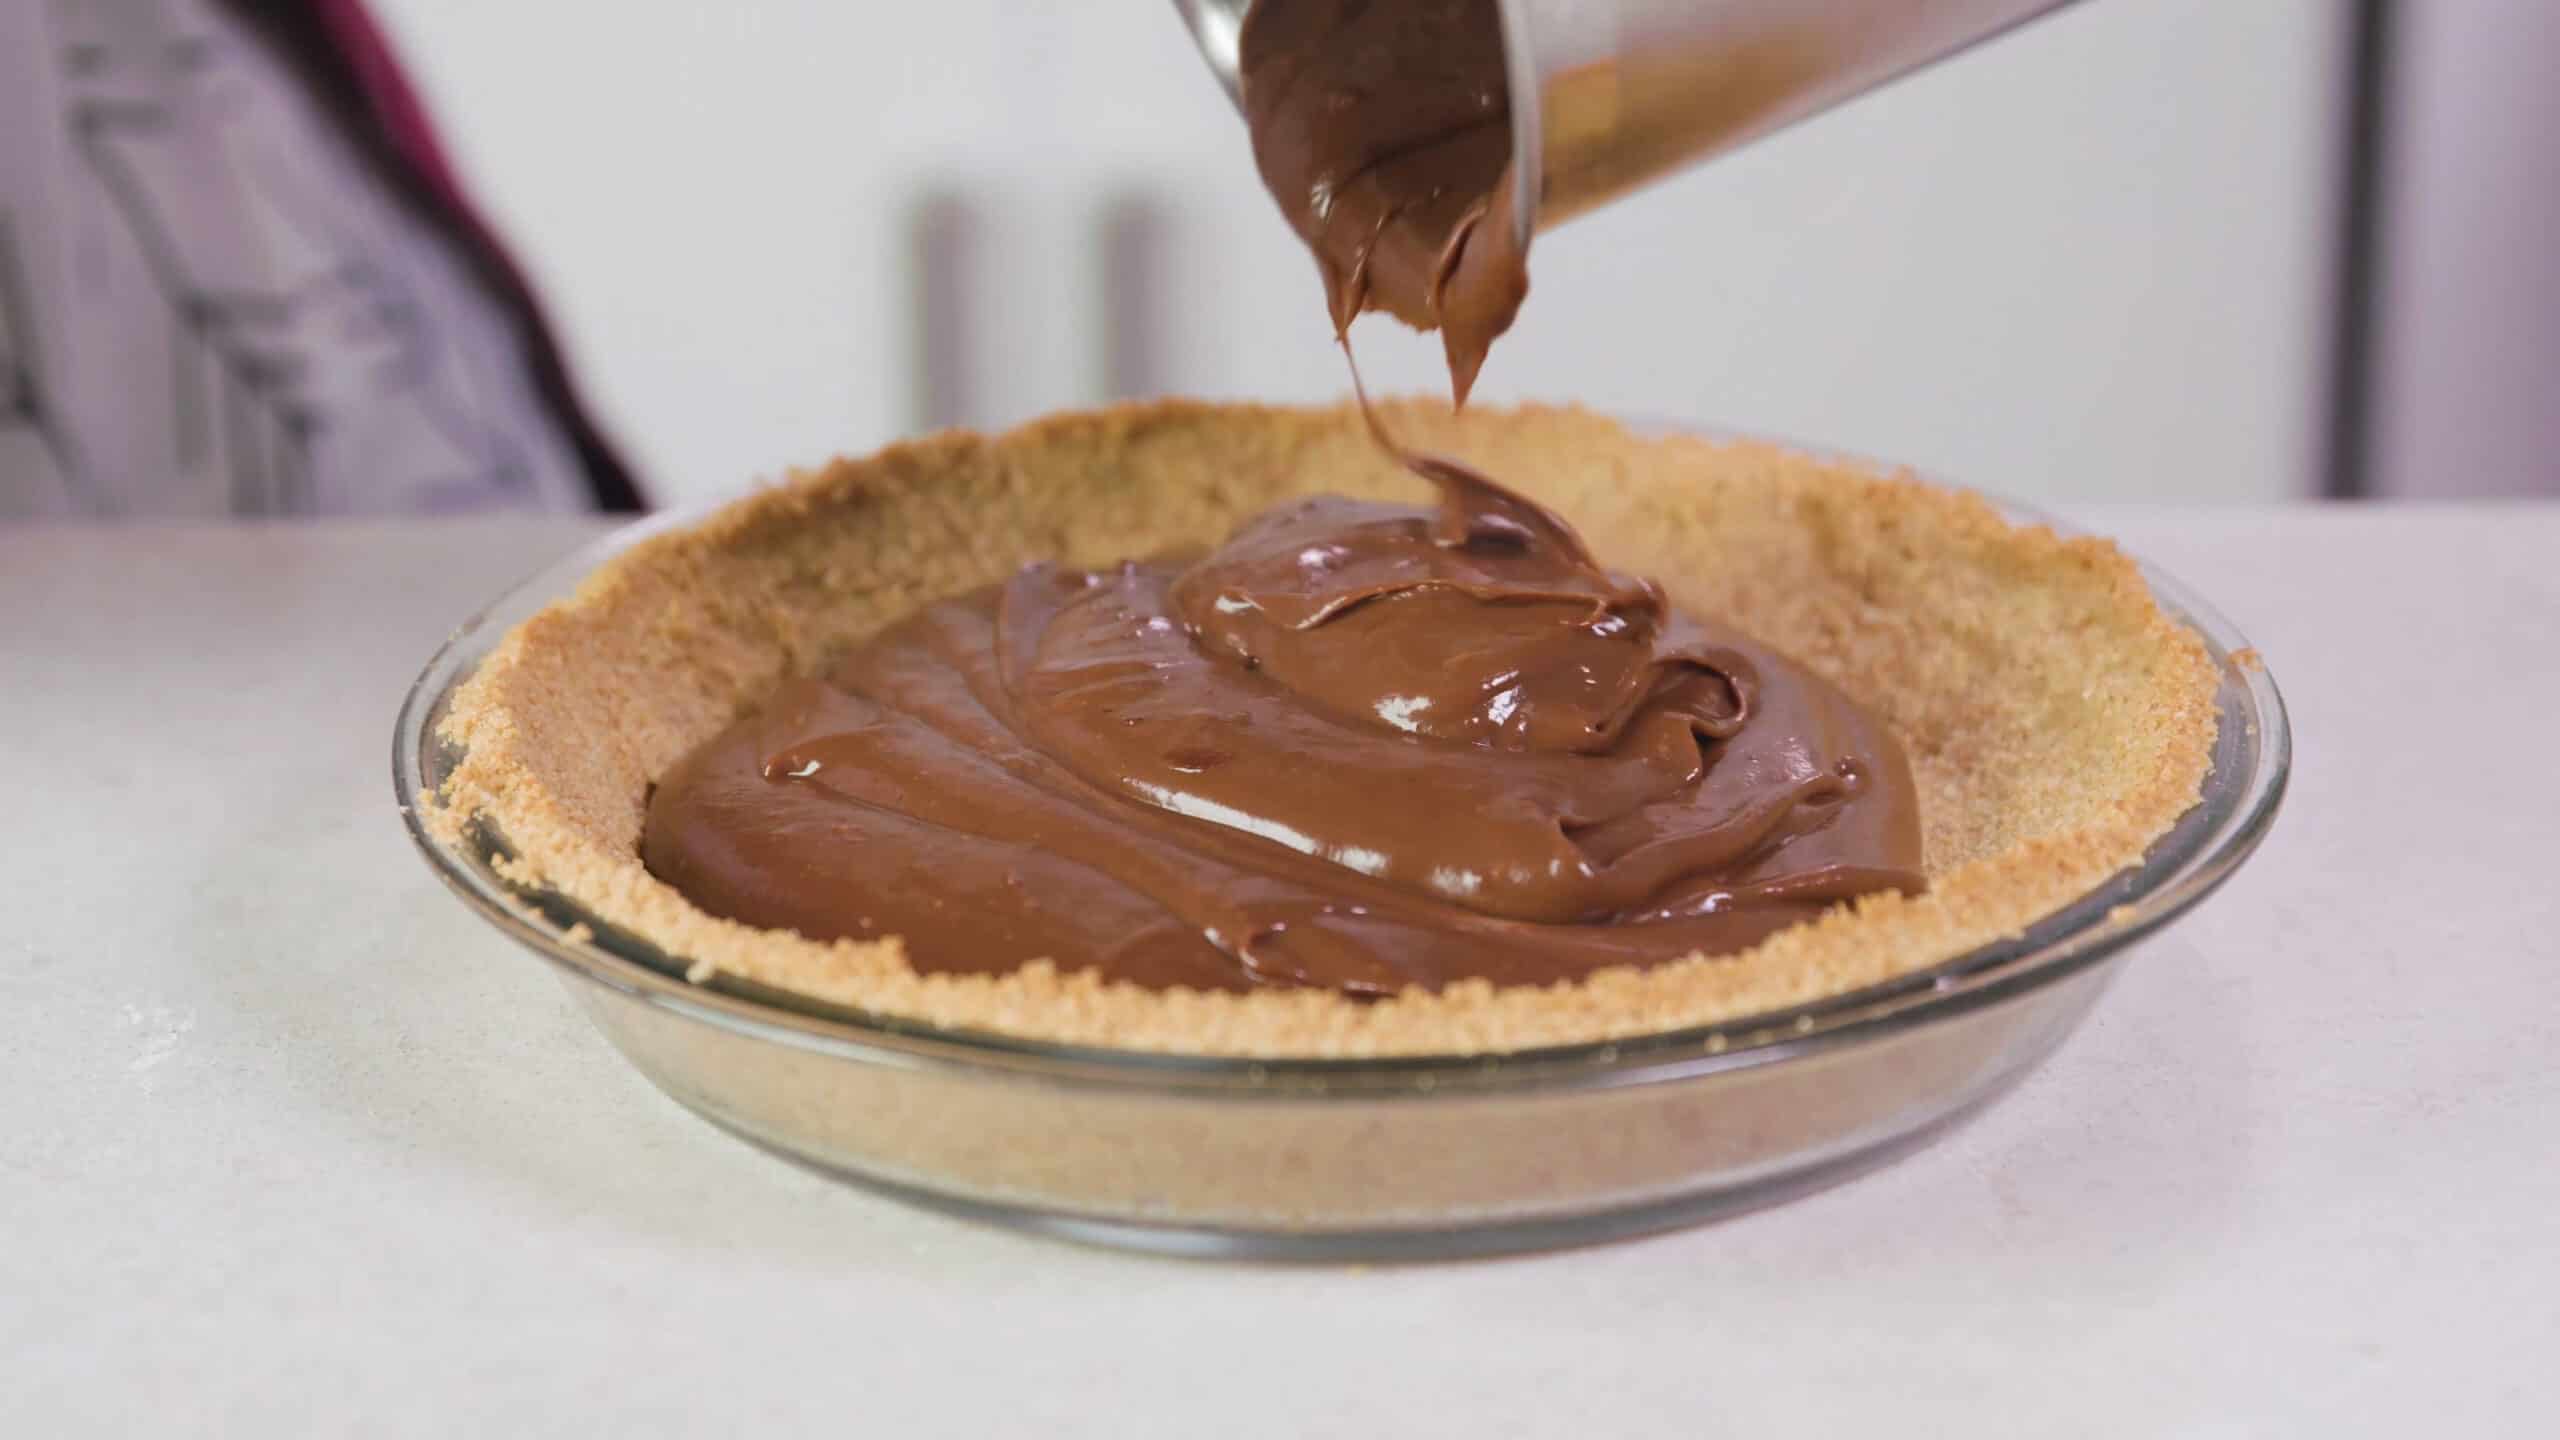 Angled view of cooked and cooled graham cracker pie crust in a clear glass pie plate and the chocolate filling being poured from a silver pot on top.